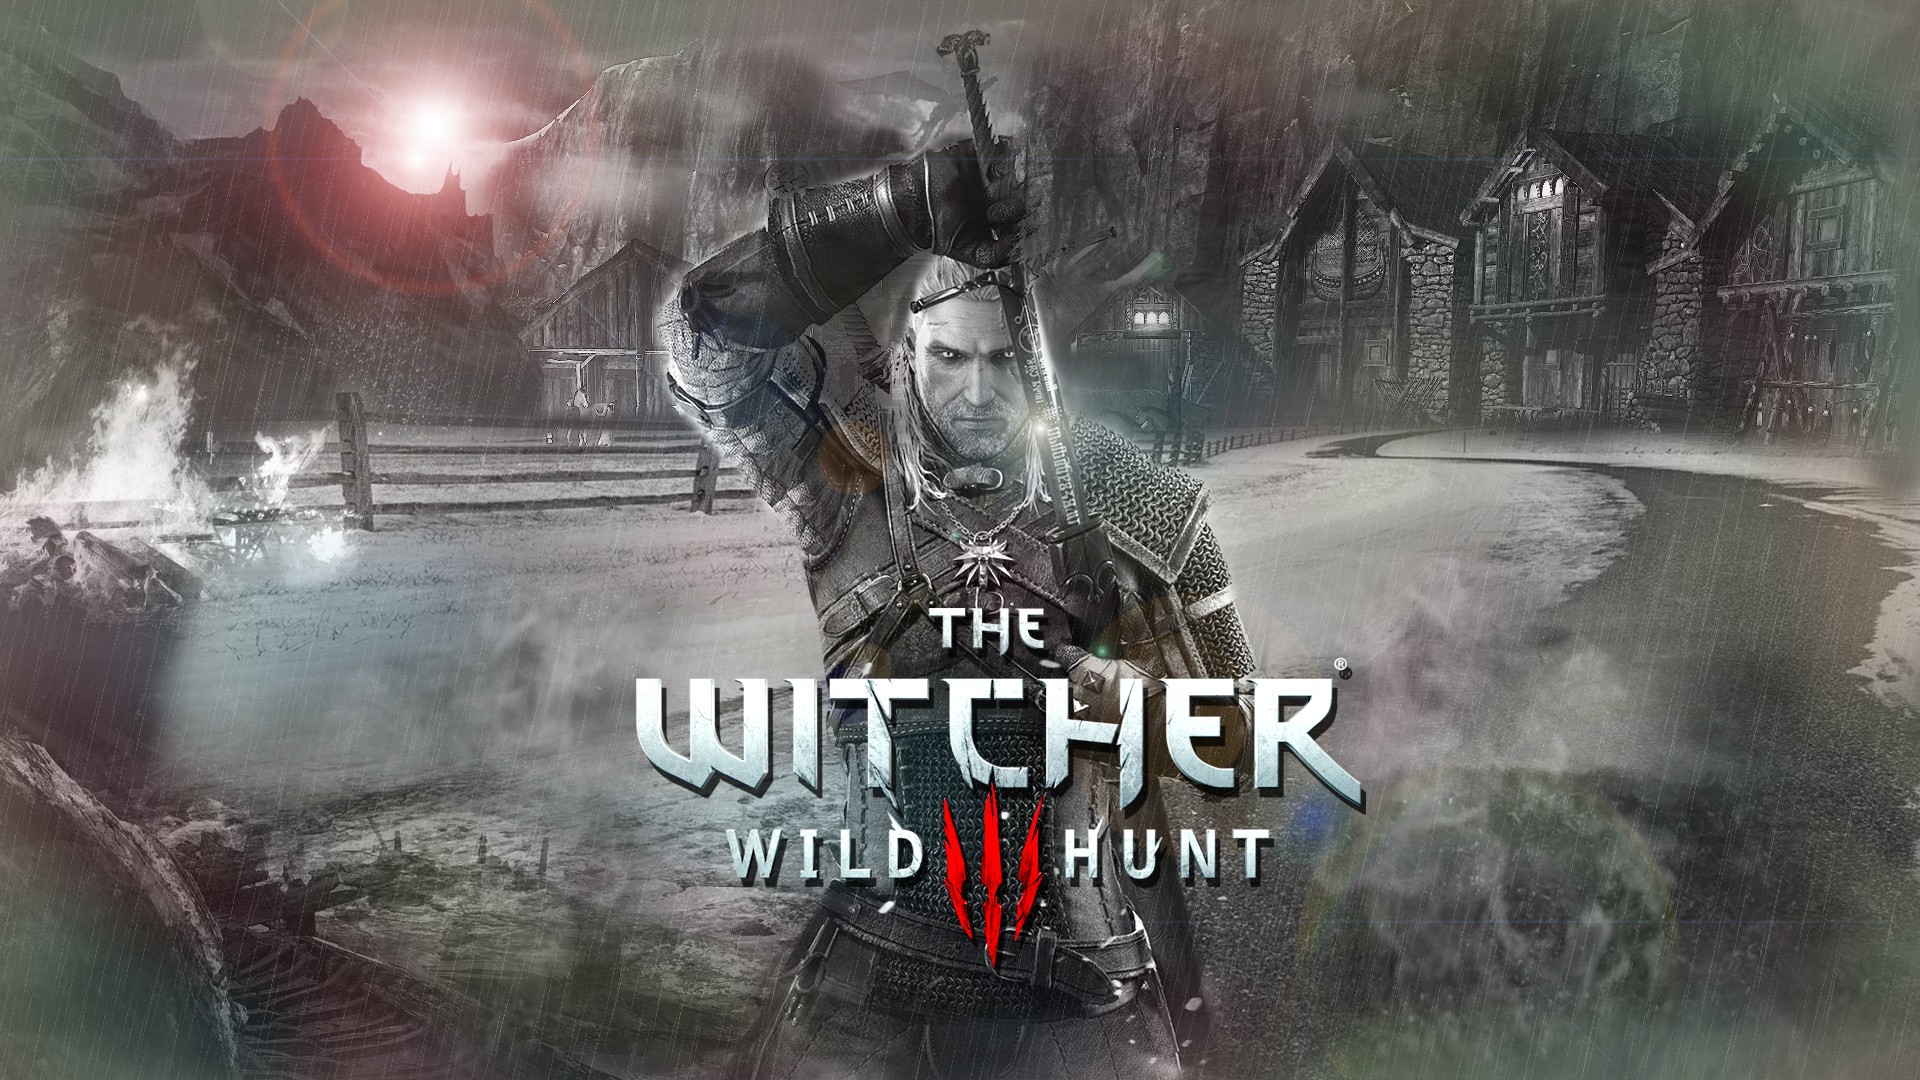 The Witcher 3 Wild Hunt Dragon Sword Geralt Of Rivia Town Horse People Fire Ice Mountains Sun The Wi 1920x1080